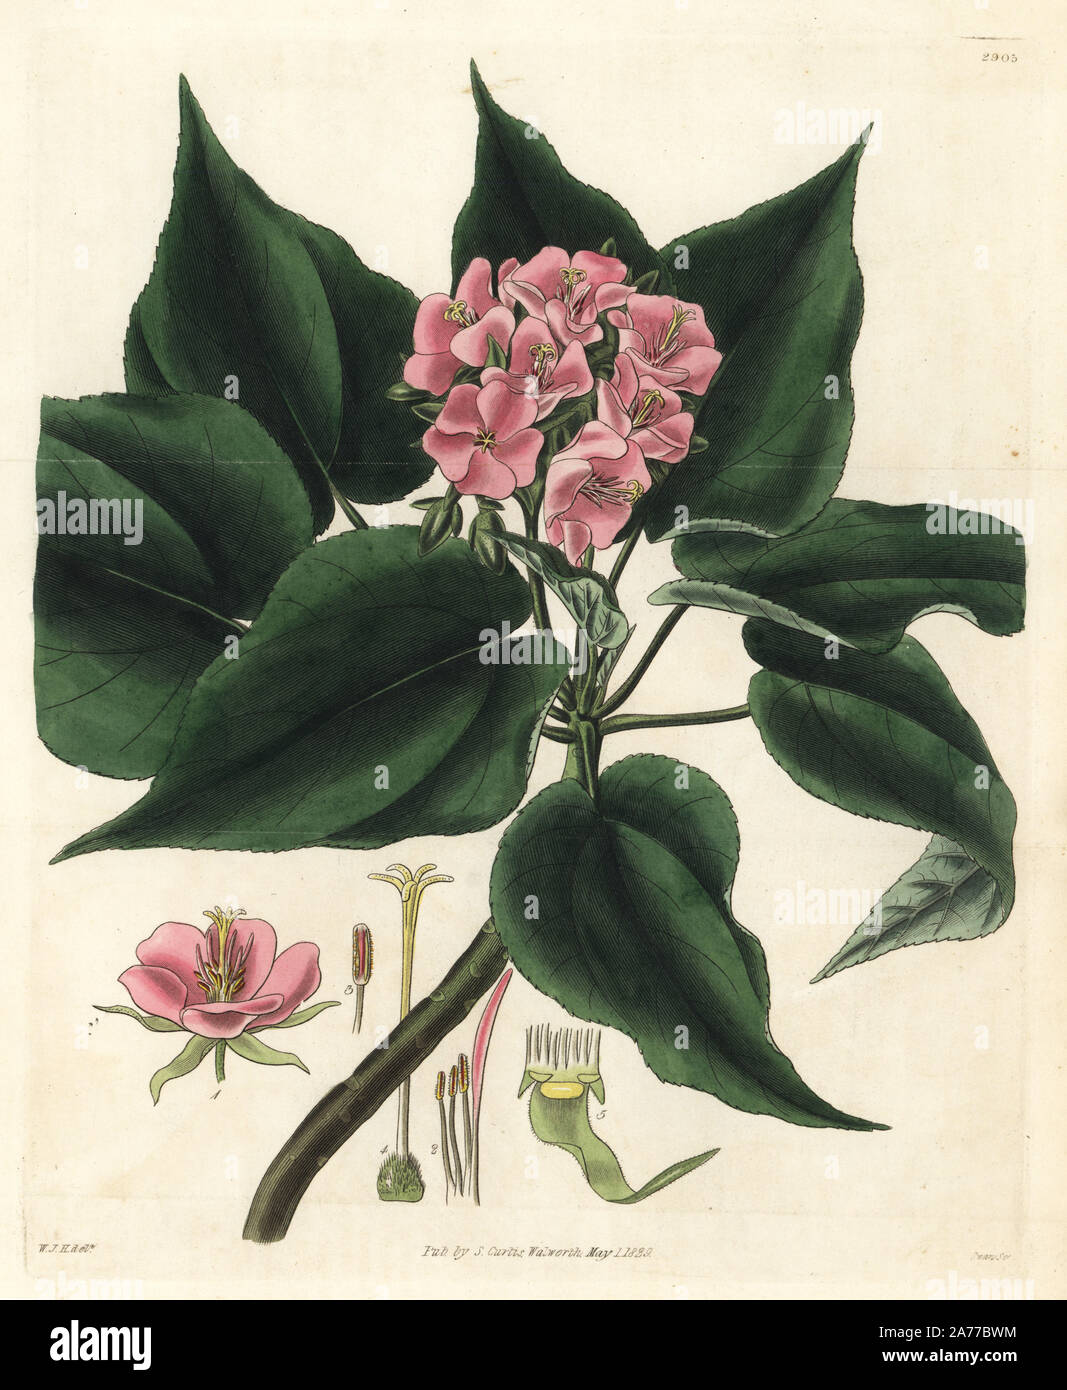 Bois bete or mahot tantan, Dombeya acutangula. Critically endangered. (Angle leaved dombeya, Dombeya angulata). Handcoloured copperplate engraving by Swan after an illustration by William Jackson Hooker from Samuel Curtis's 'Botanical Magazine,' London, 1829. Stock Photo